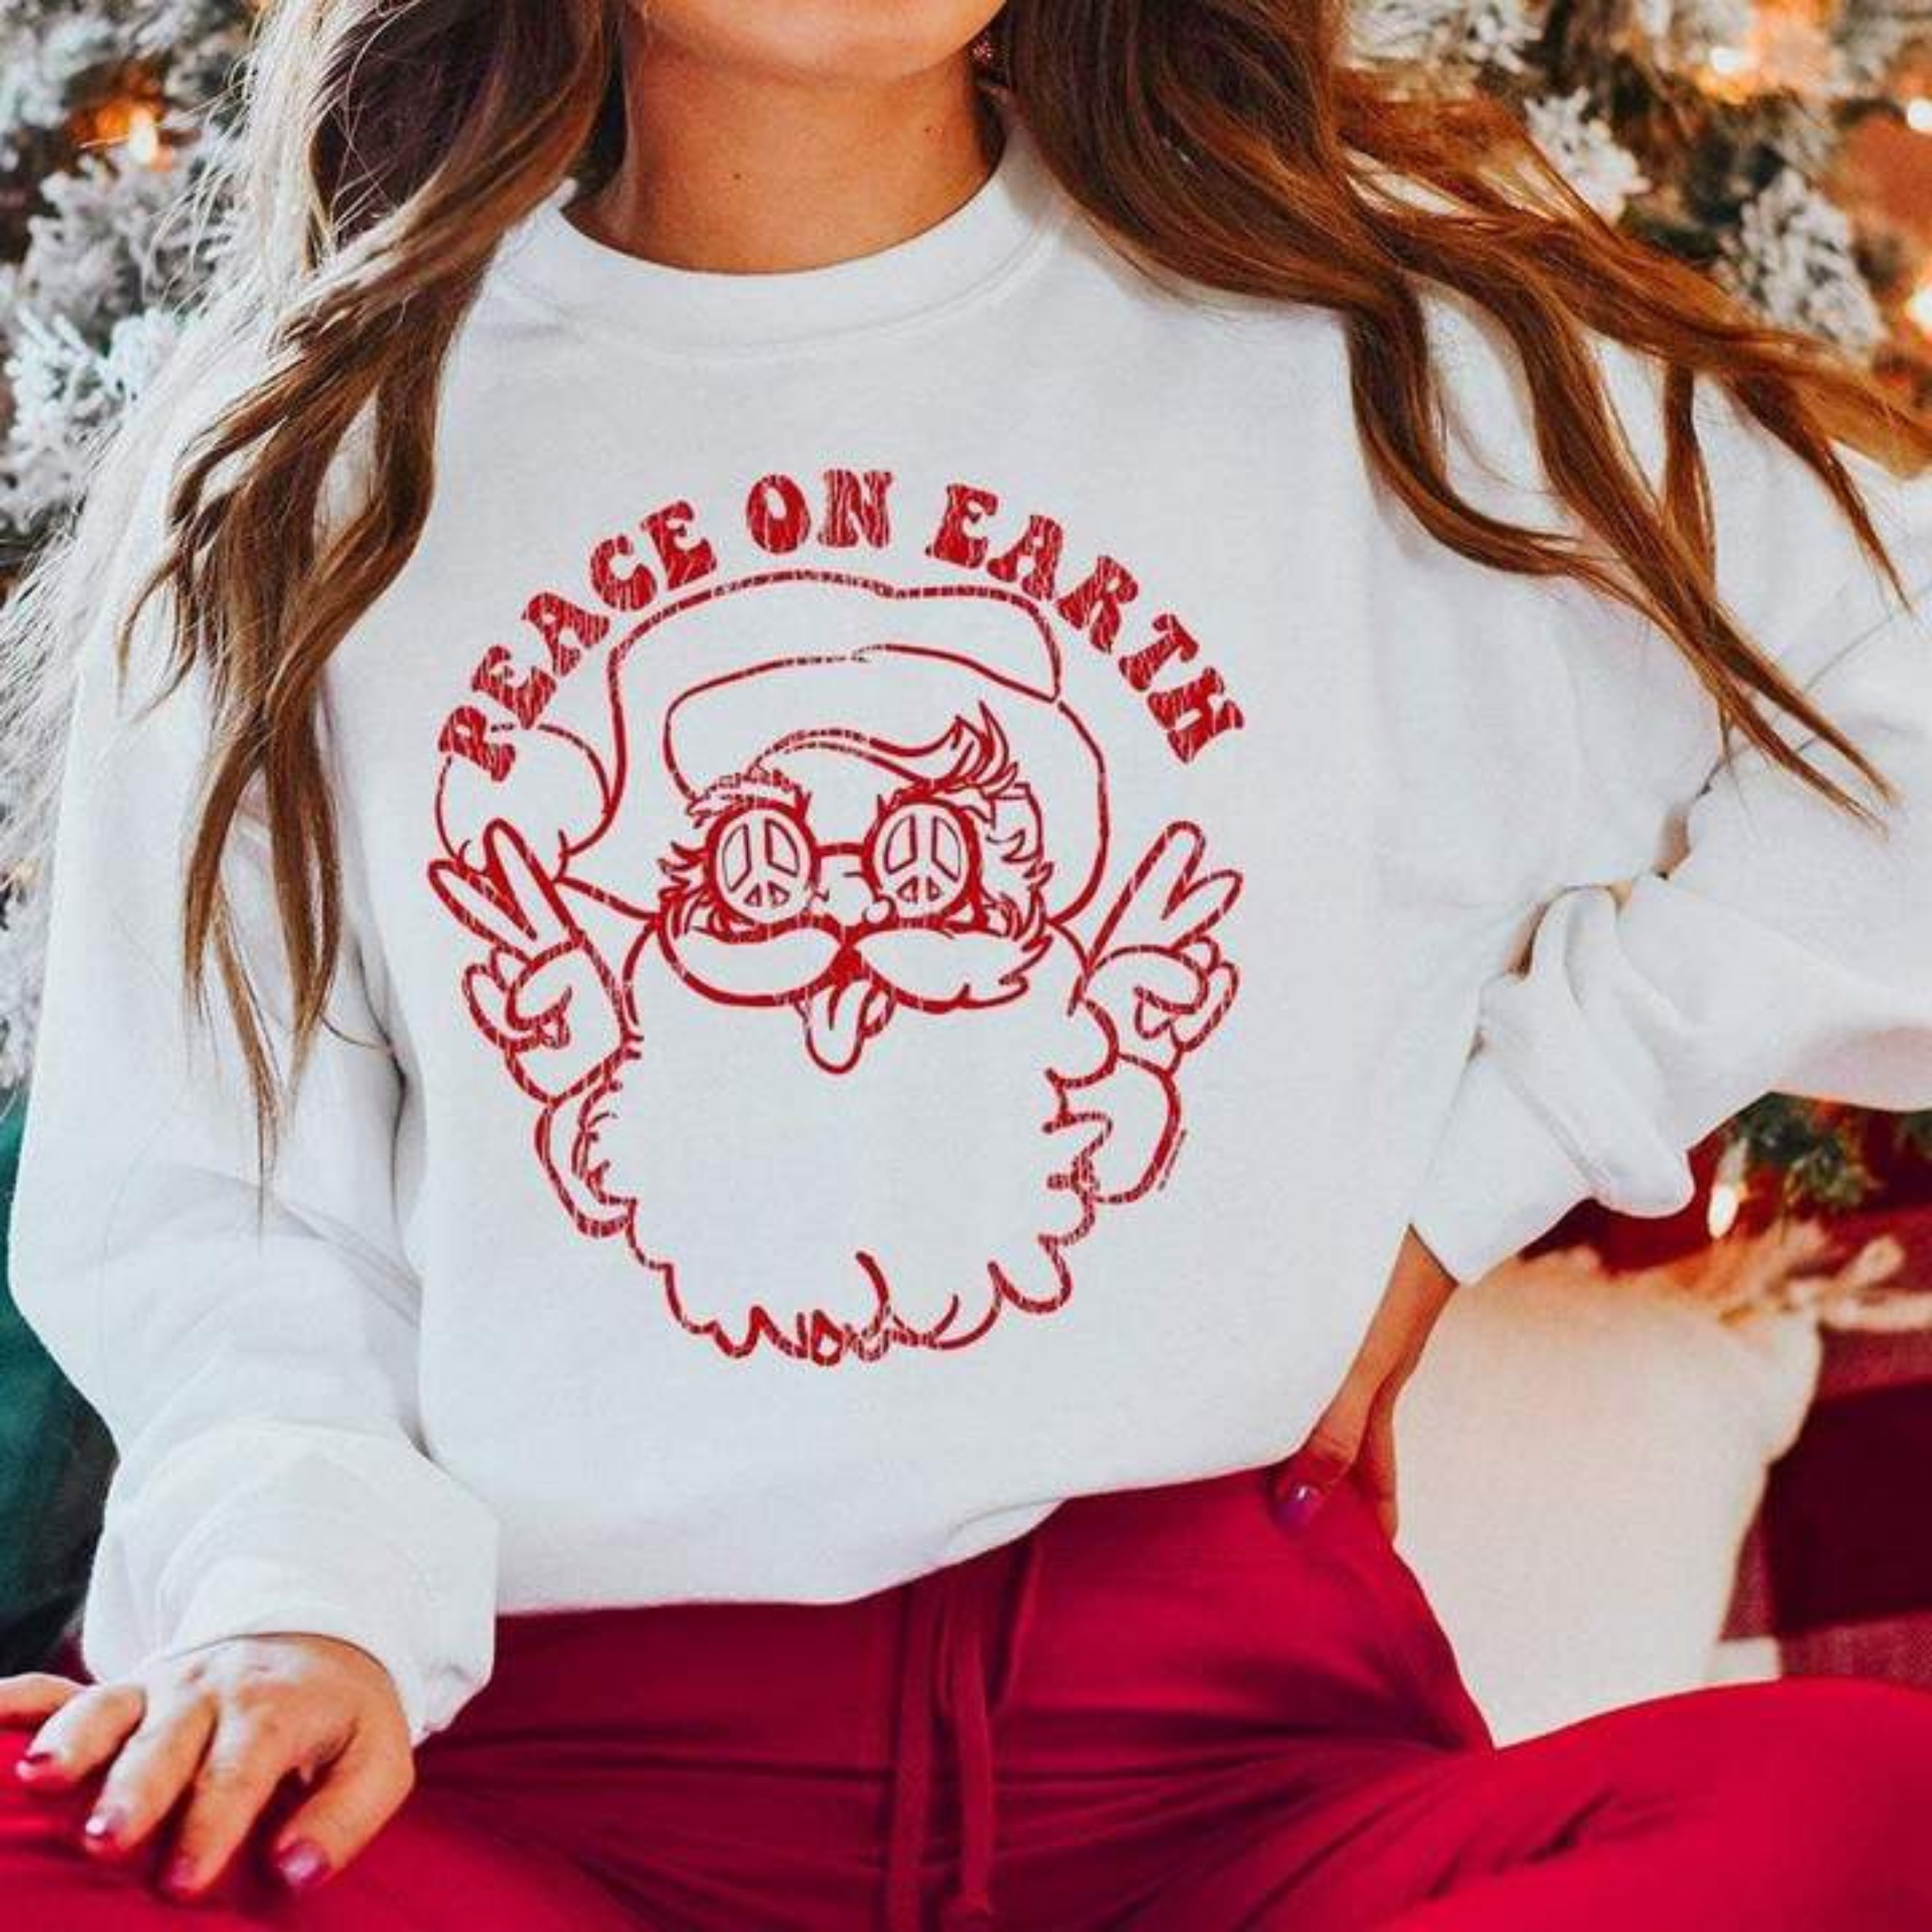 This white pullover includes a crew neckline, long sleeves, and a graphic that says "Peace on Earth" with a hippie santa all in red. The model has this sweatshirt modeled with a pair of red pants. 